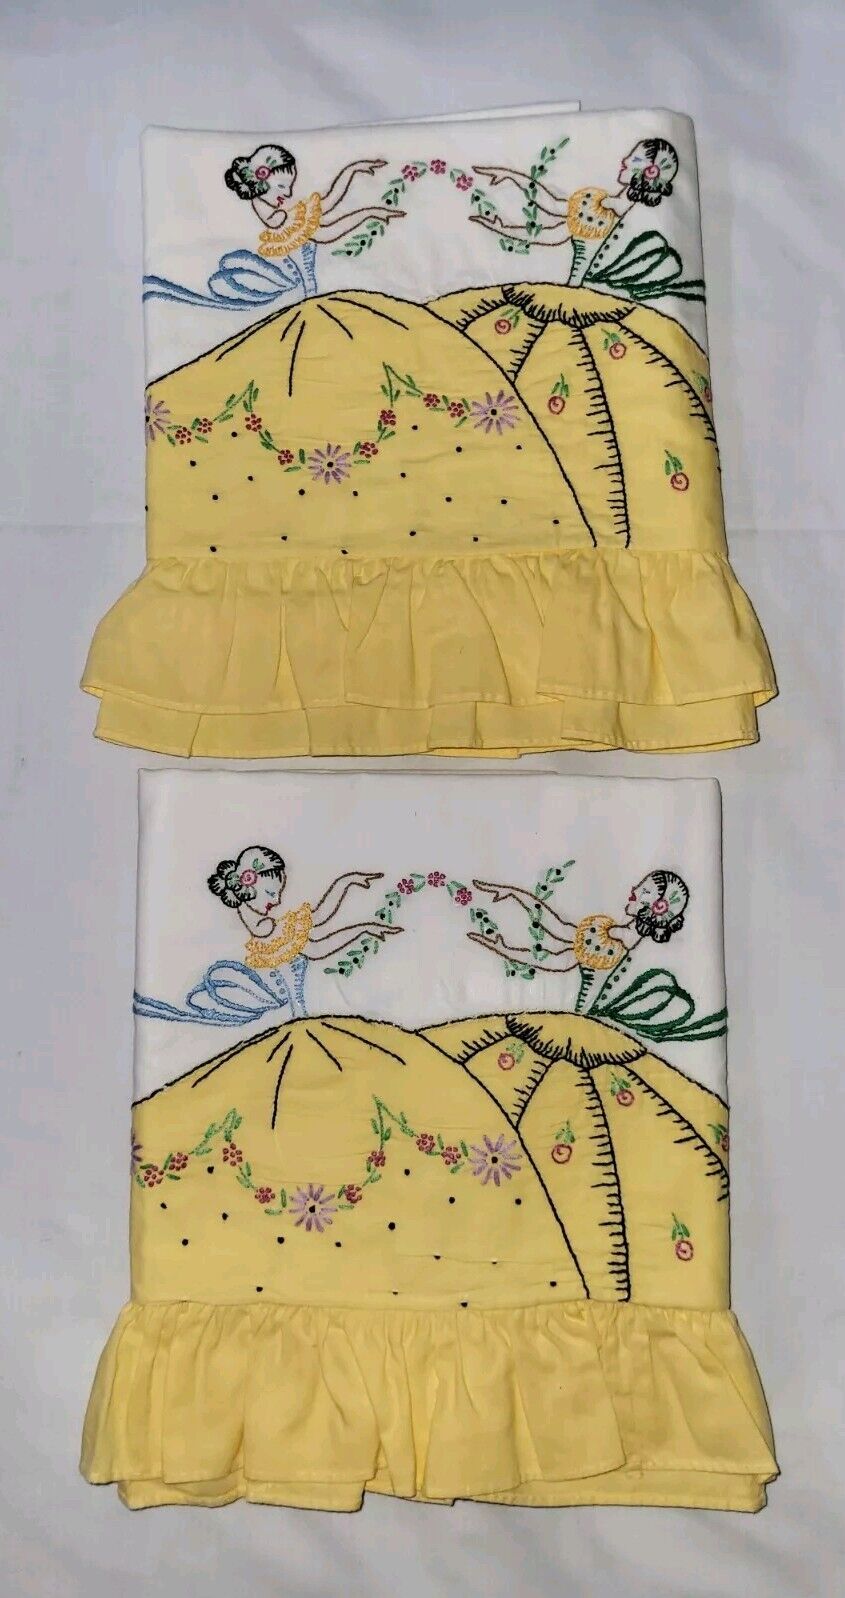 VTG Pair Pillowcases Hand Embroidered fabric applique BIG SKIRT Belles